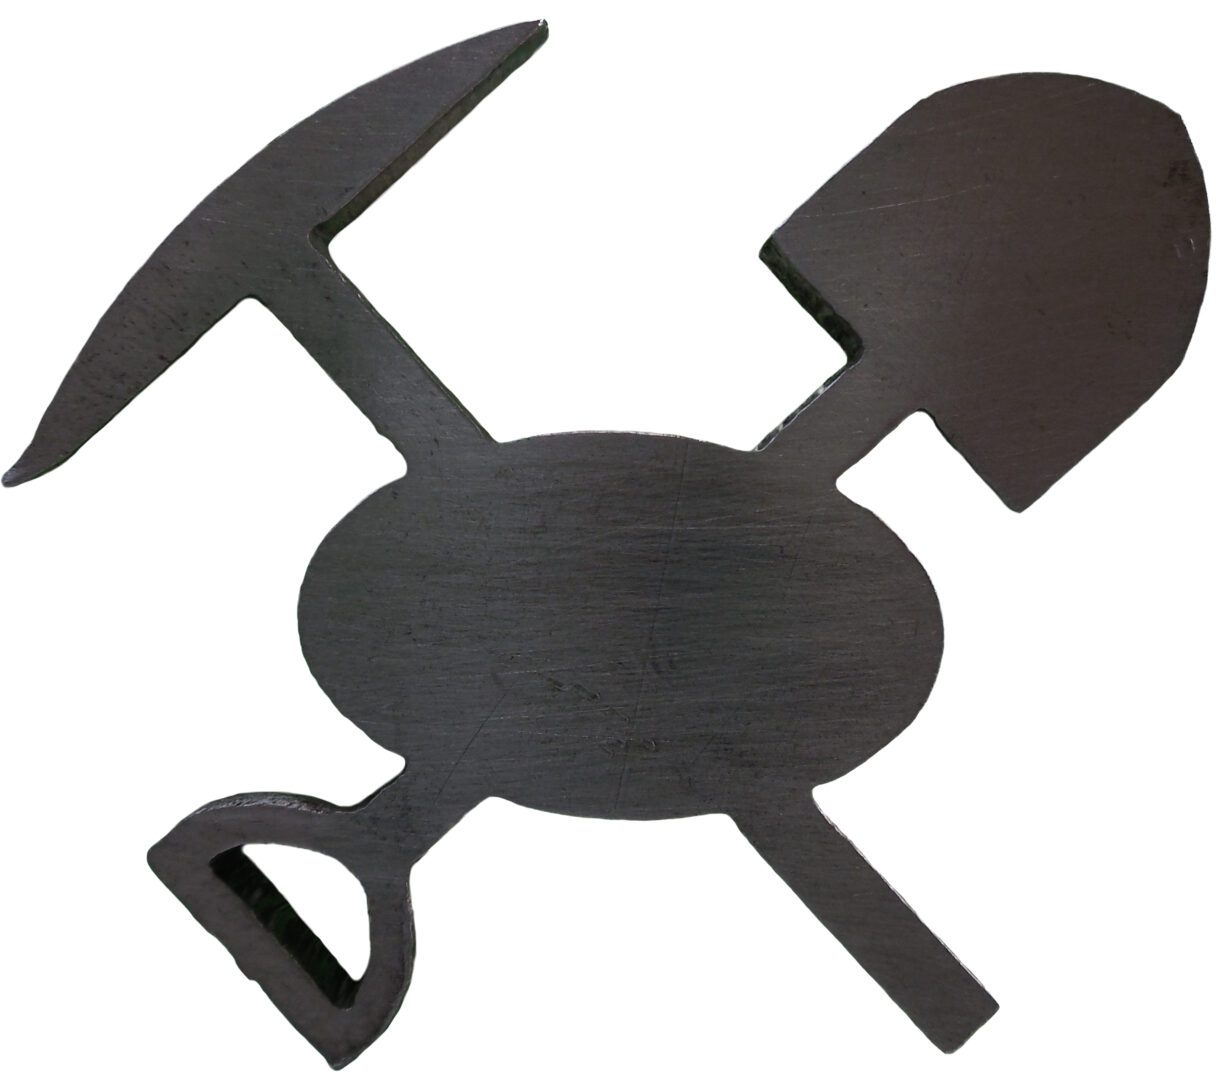 A black and white picture of a Branding Iron Pick Pan and Shovel.